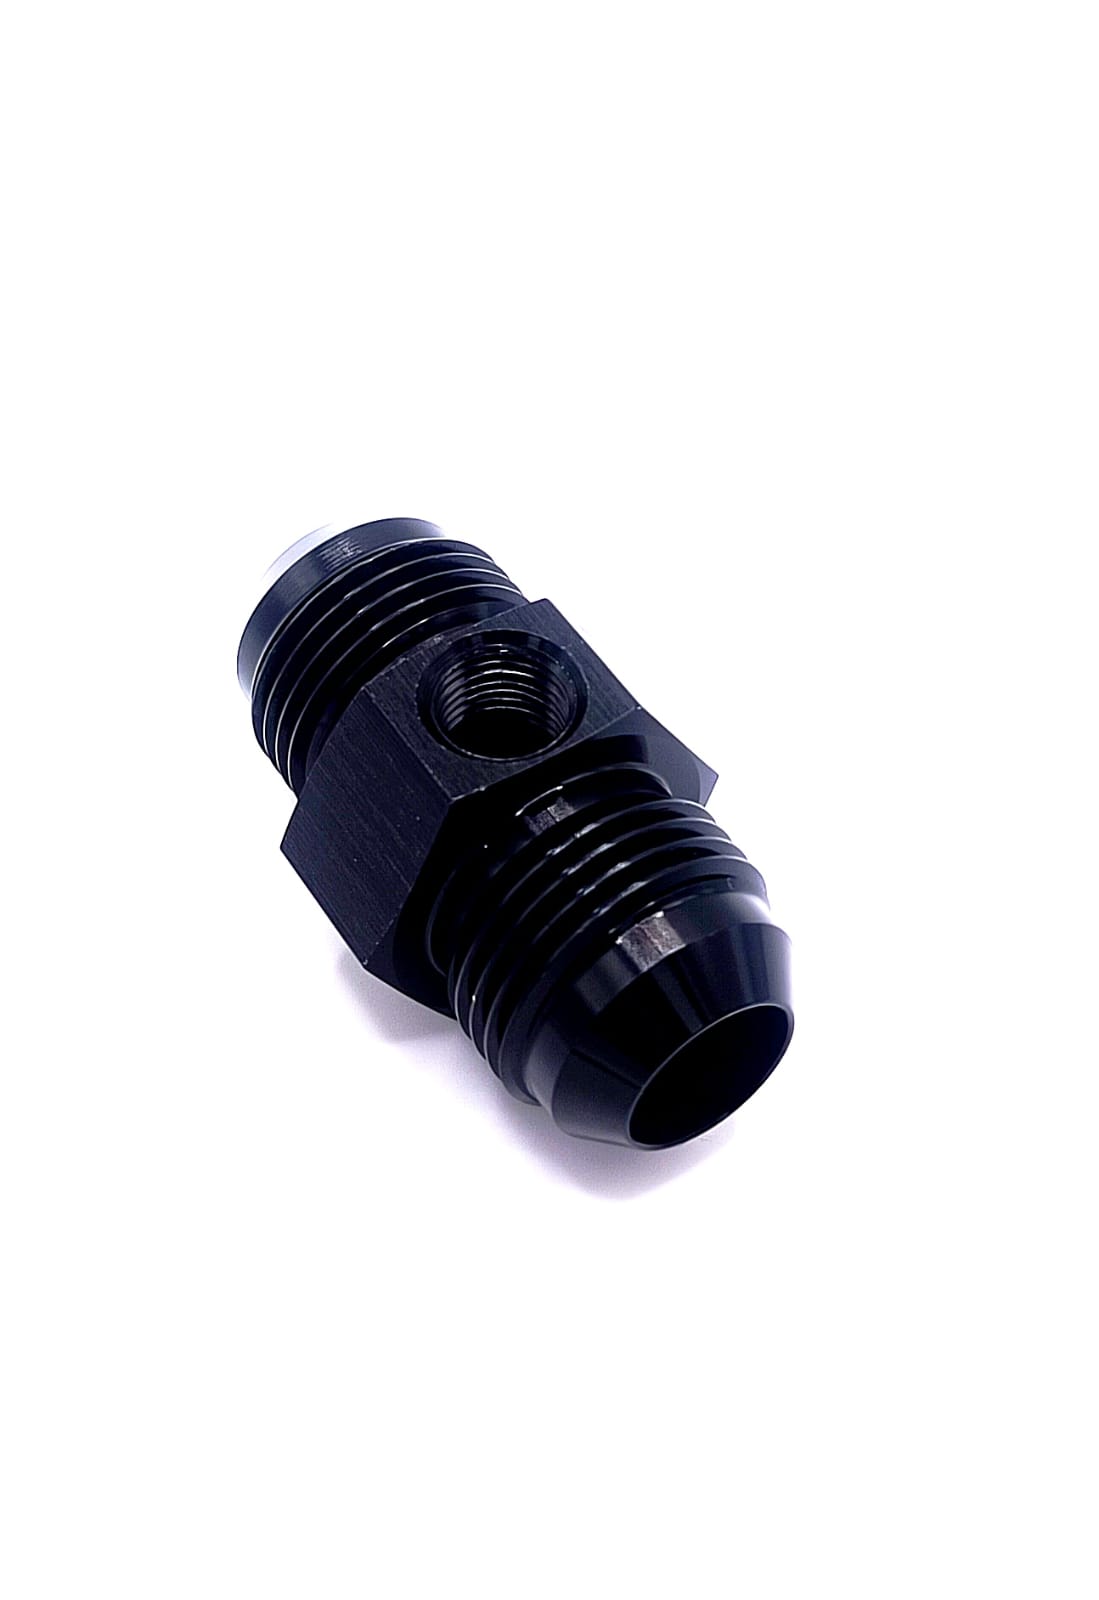 Straight Male To Male Flare With 1/8 NPT Port AN10 (BLACK)